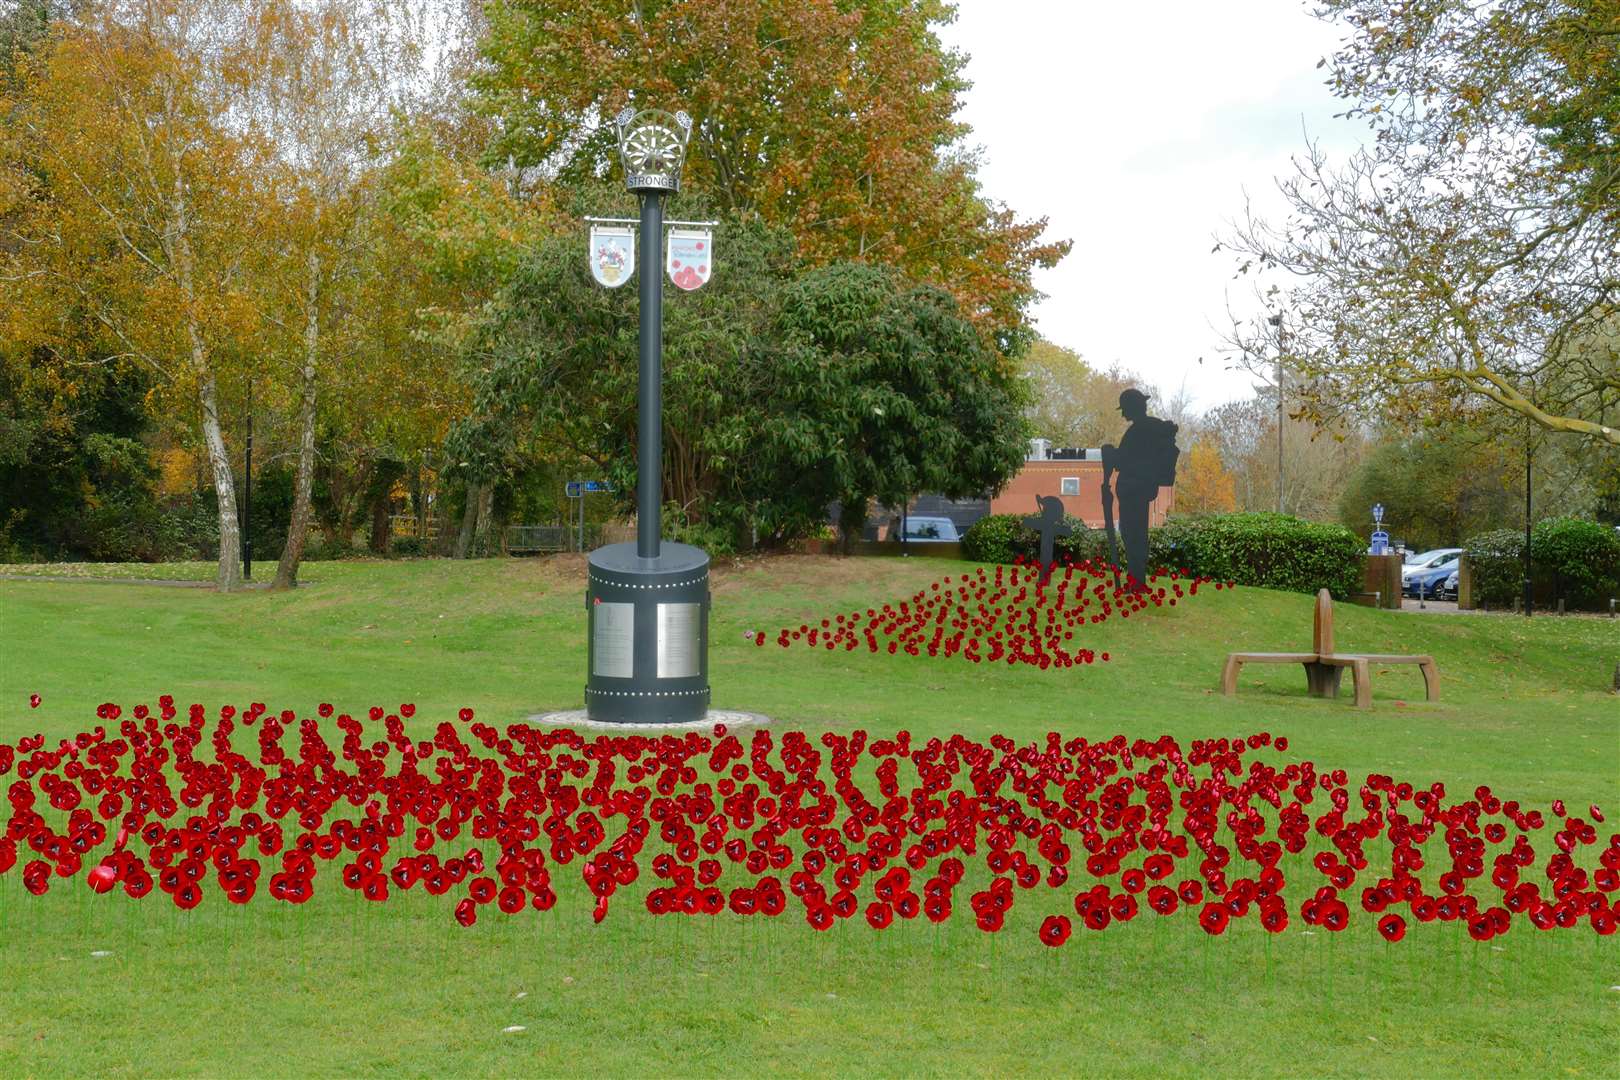 The eye-catching poppy display. Picture: Andy Clark